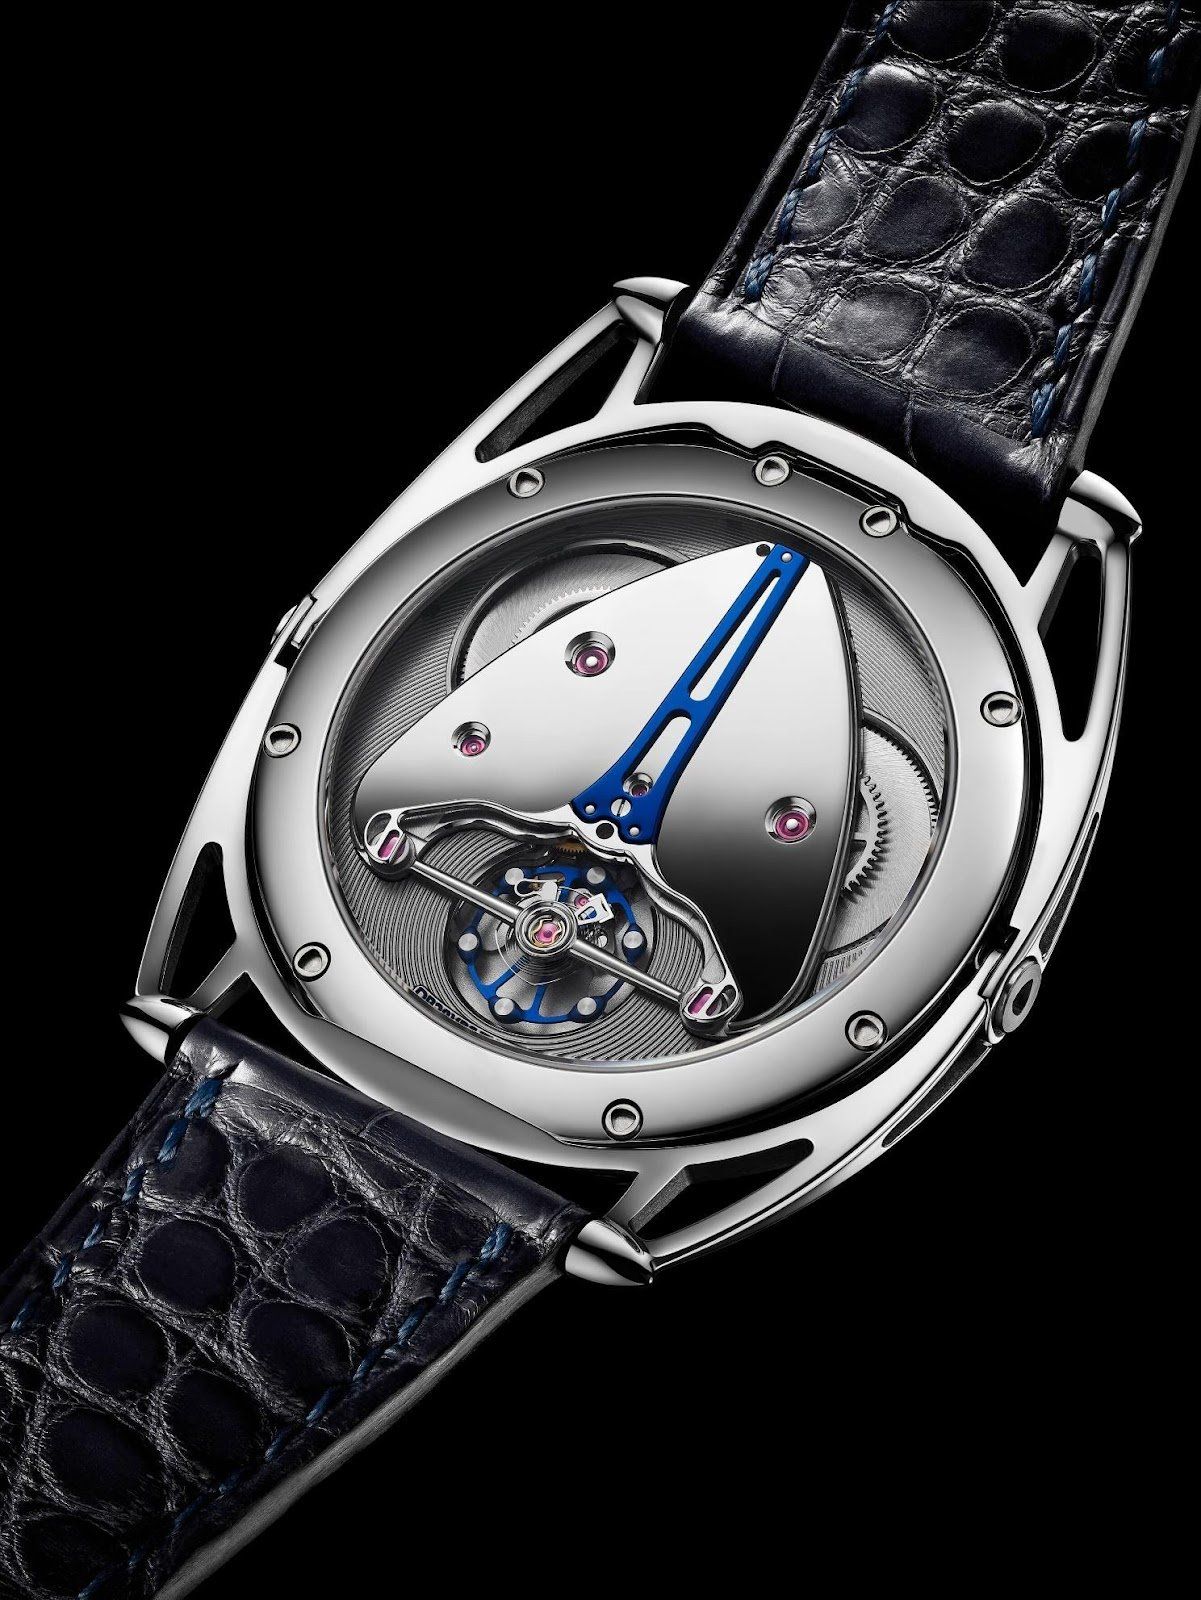 In-house caliber DB2005 powers this timepiece with its hours and minutes display